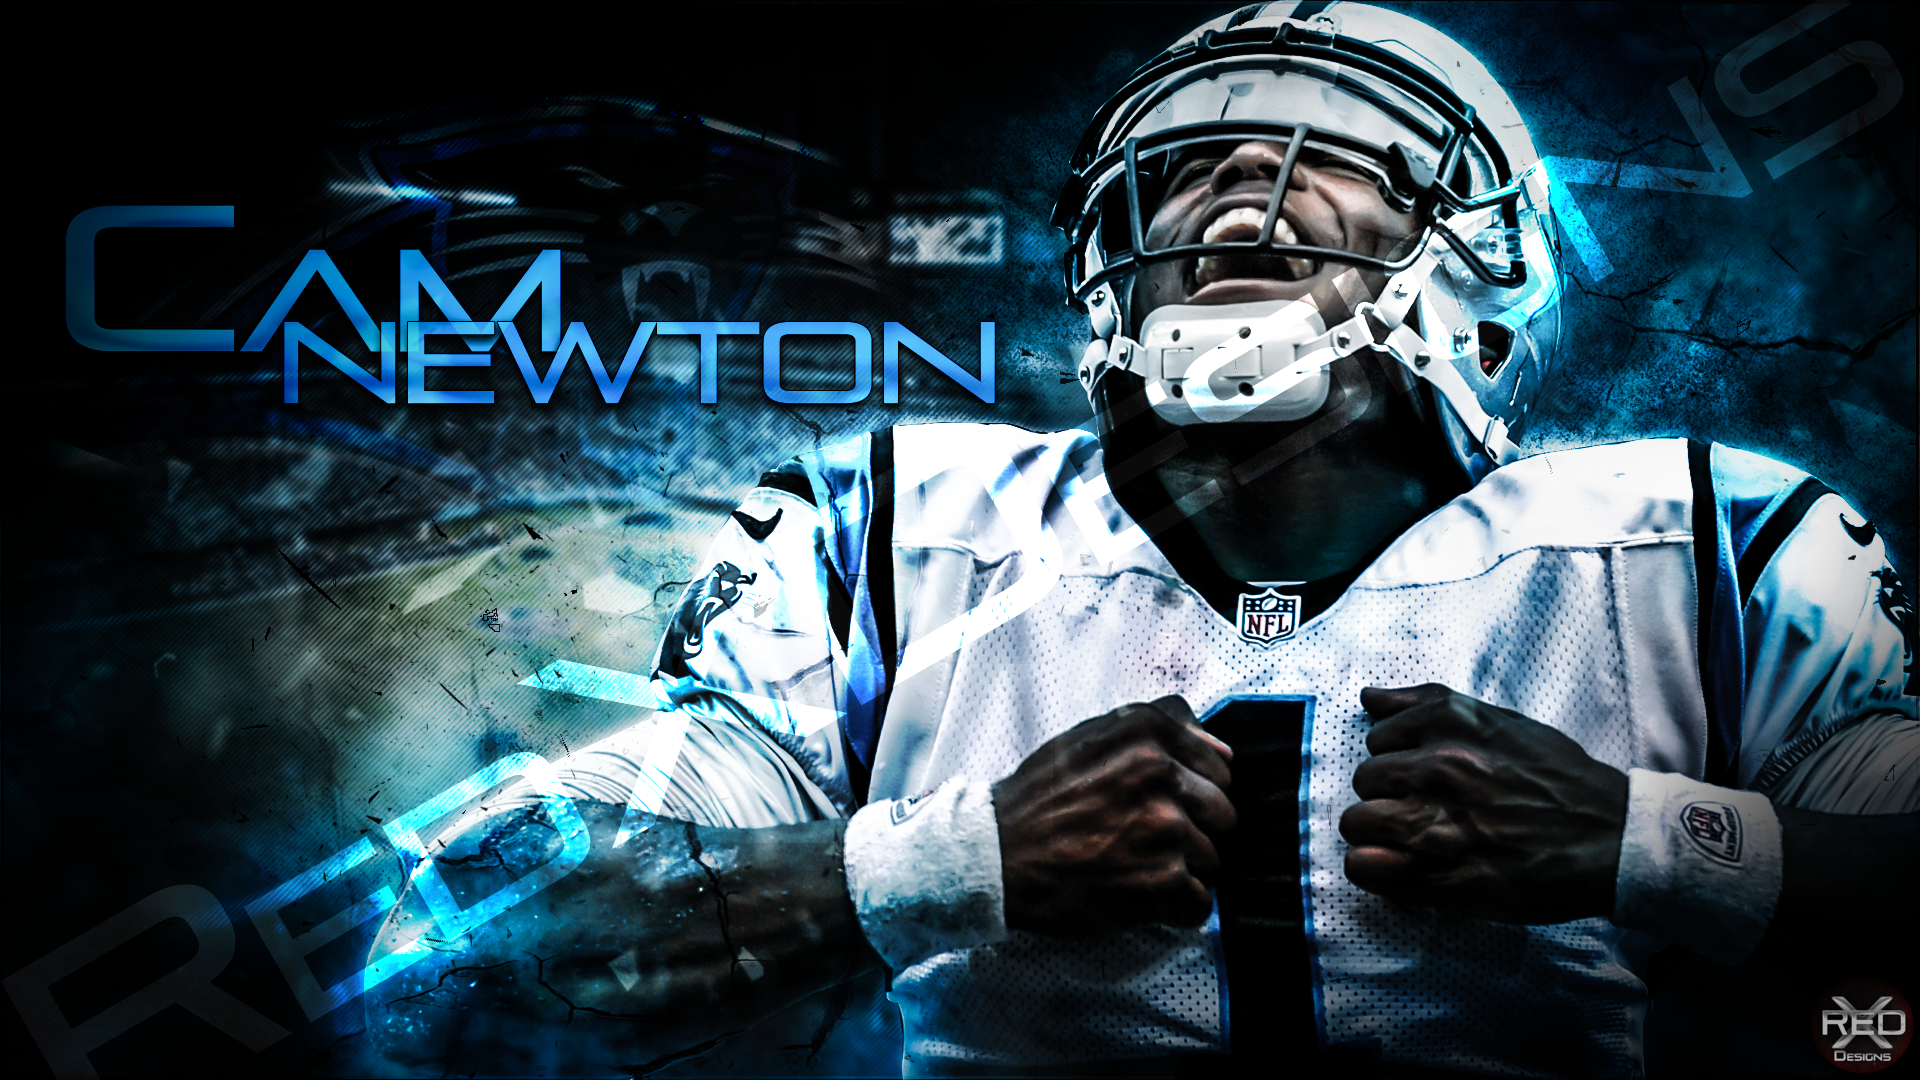 HD desktop wallpaper featuring an action pose of Cam Newton in his football gear with a stylized background.